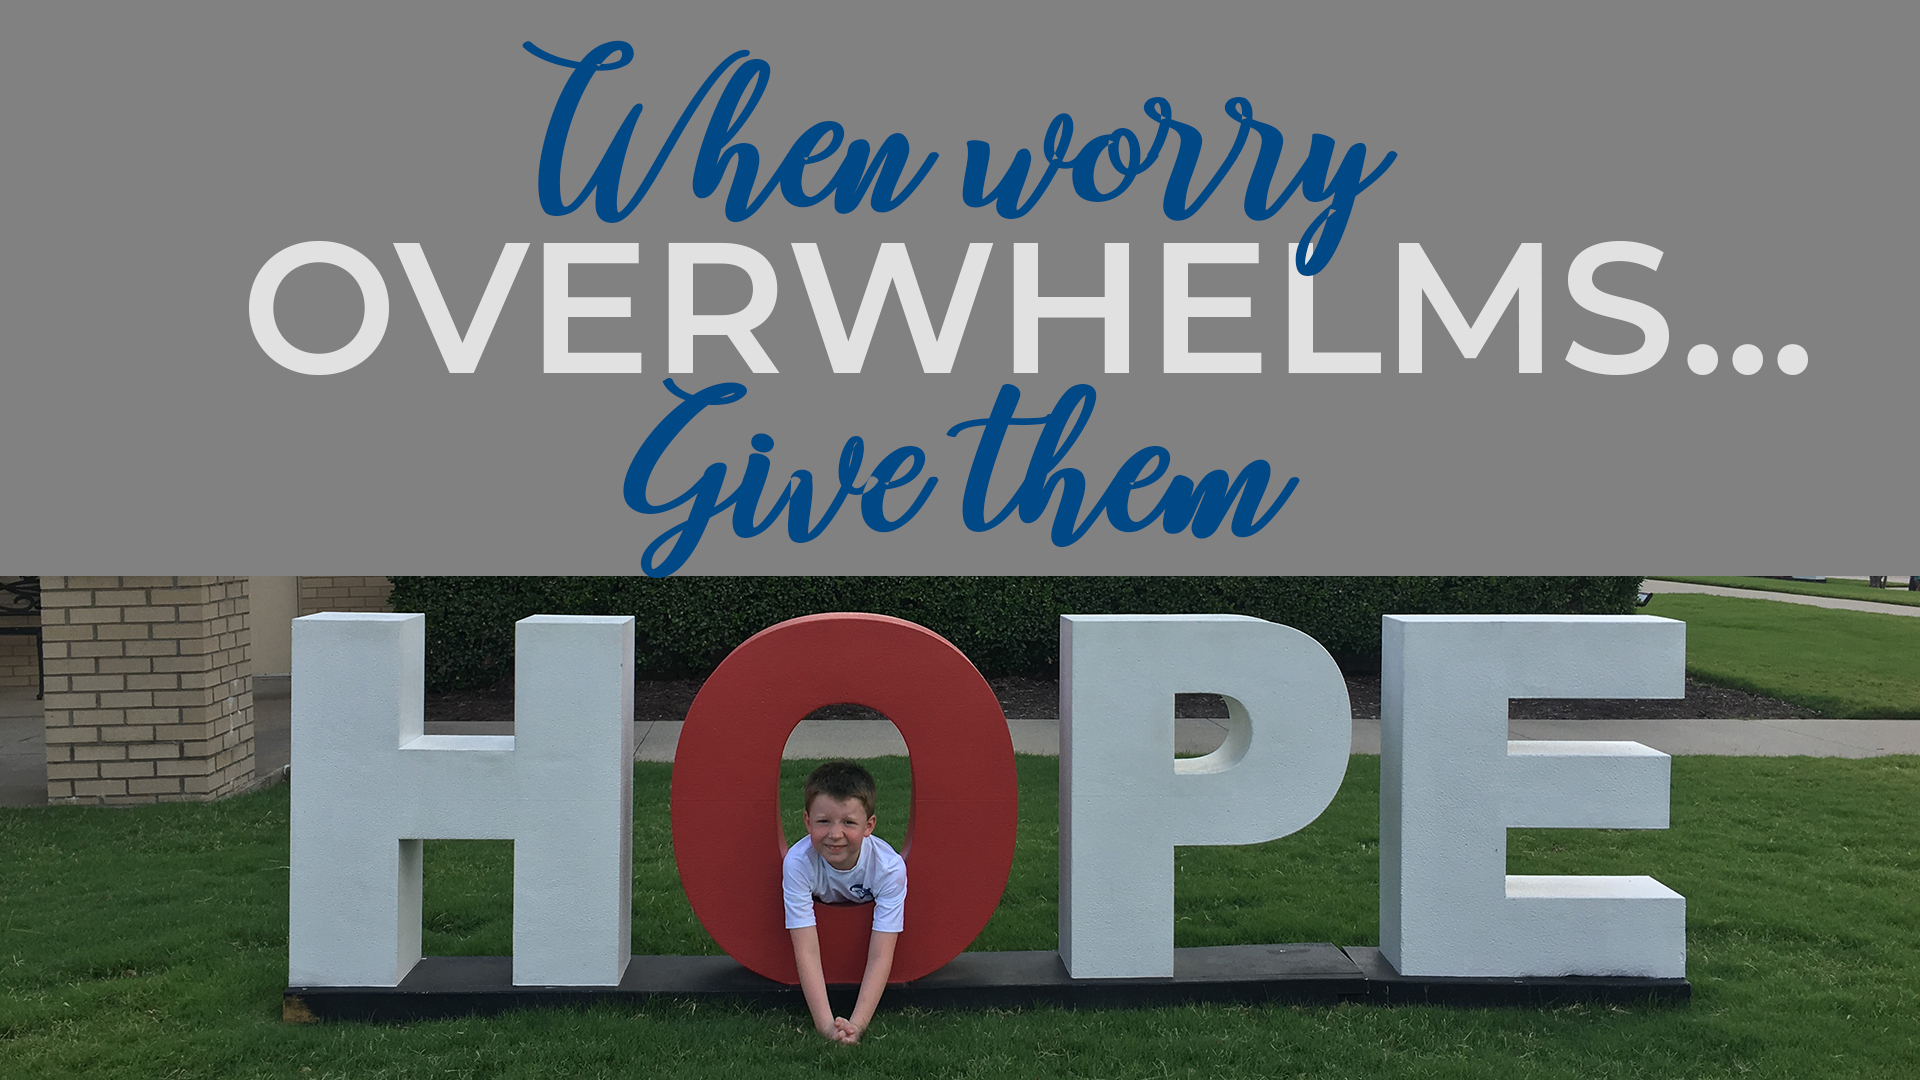 With a world filled with hopeless situations, our children need to know a constant hope. A hope that is found in Jesus Christ. When worry overwhelms, give them hope.